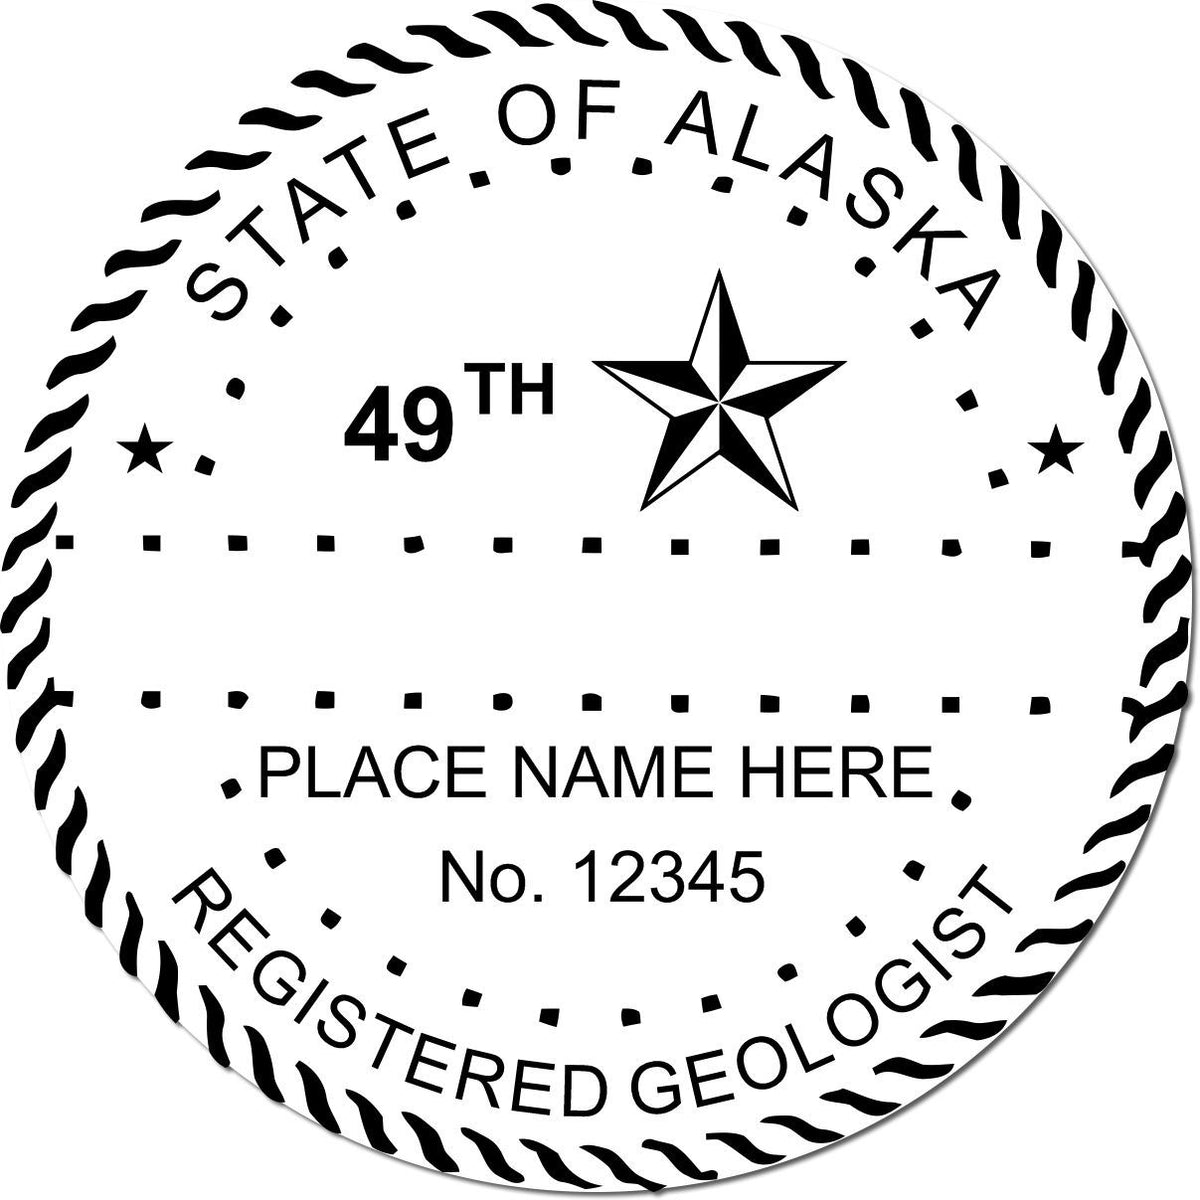 This paper is stamped with a sample imprint of the Slim Pre-Inked Alaska Professional Geologist Seal Stamp, signifying its quality and reliability.